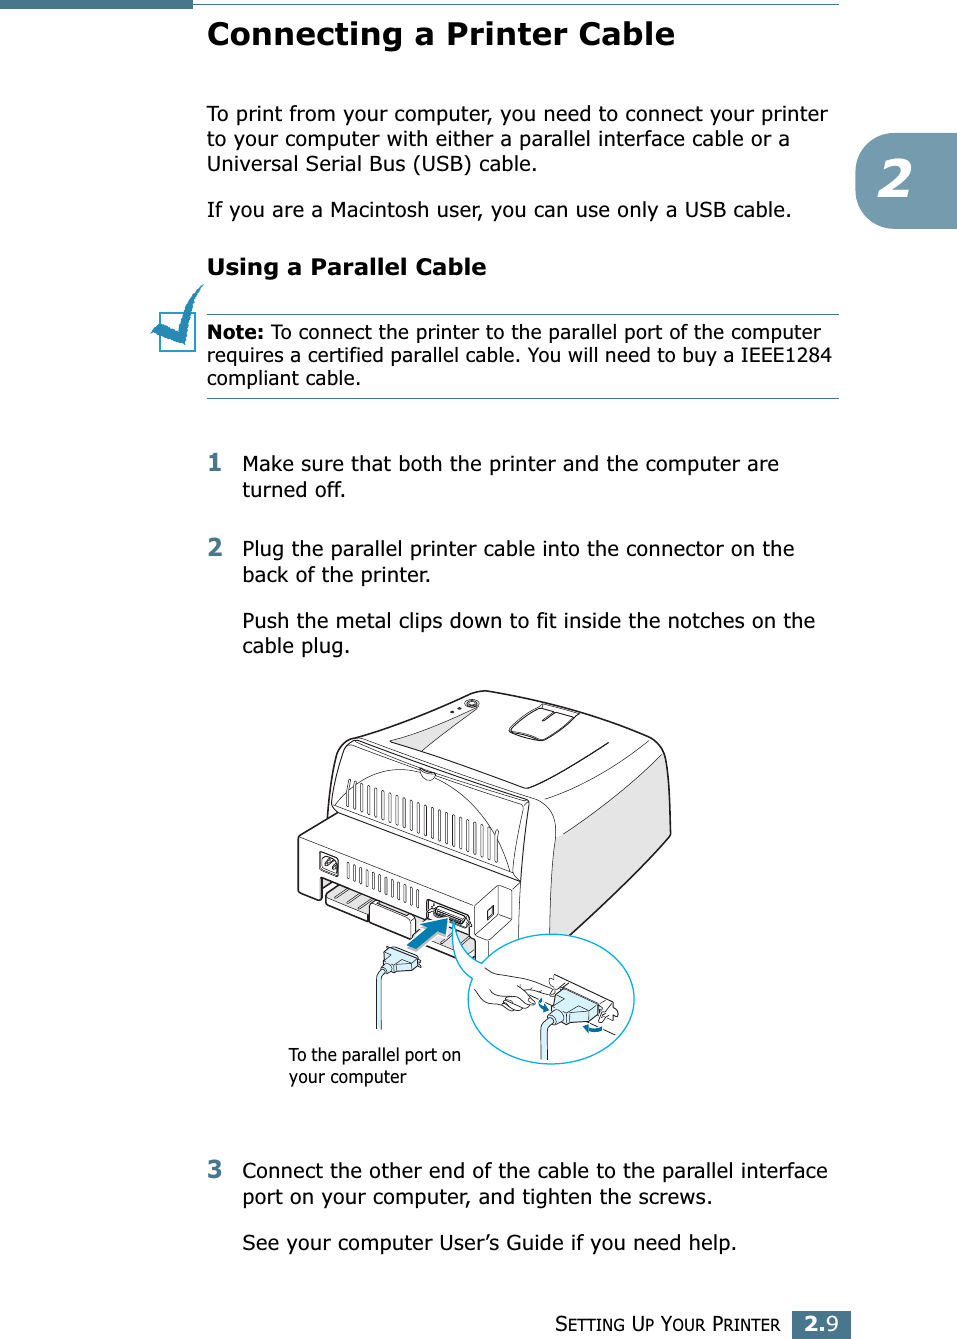 SETTING UP YOUR PRINTER2.92Connecting a Printer CableTo print from your computer, you need to connect your printer to your computer with either a parallel interface cable or a Universal Serial Bus (USB) cable. If you are a Macintosh user, you can use only a USB cable. Using a Parallel CableNote: To connect the printer to the parallel port of the computer requires a certified parallel cable. You will need to buy a IEEE1284 compliant cable.1Make sure that both the printer and the computer are turned off.2Plug the parallel printer cable into the connector on the back of the printer. Push the metal clips down to fit inside the notches on the cable plug.3Connect the other end of the cable to the parallel interface port on your computer, and tighten the screws. See your computer User’s Guide if you need help.To the parallel port on your computer